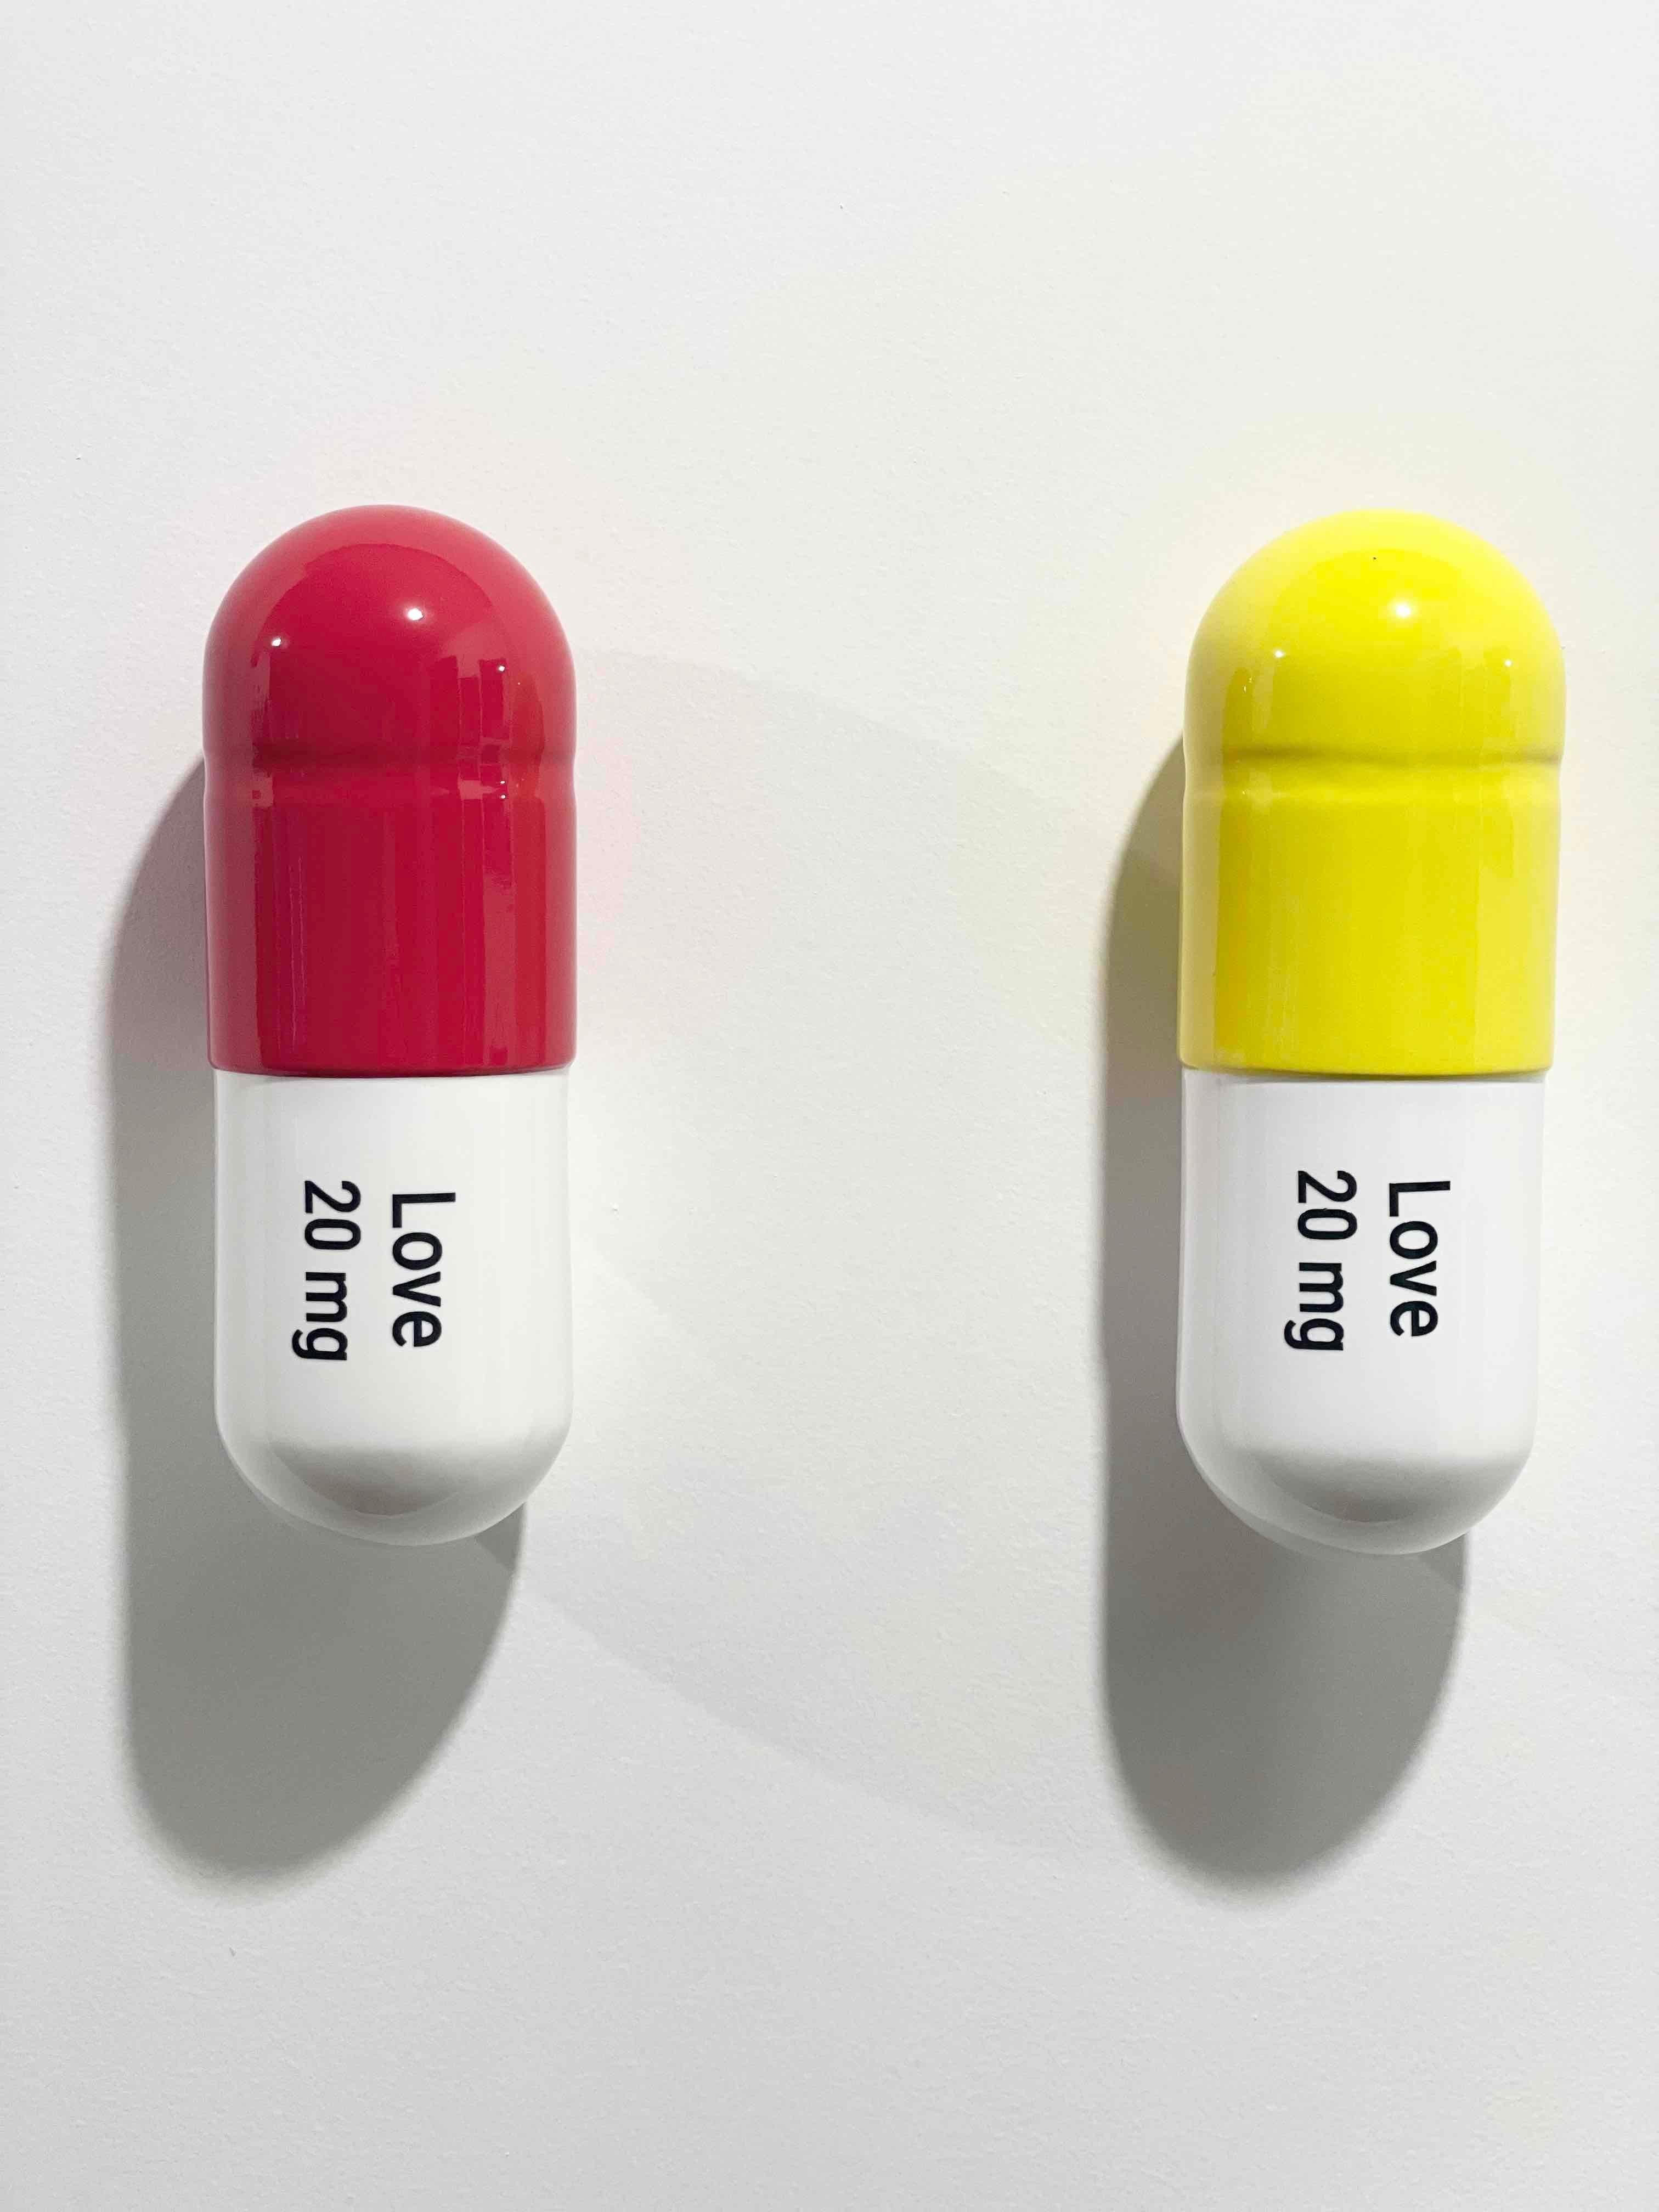 Tal Nehoray Still-Life Sculpture - 20 ML Love pill Combo (Red, Yellow and White) - figurative sculpture